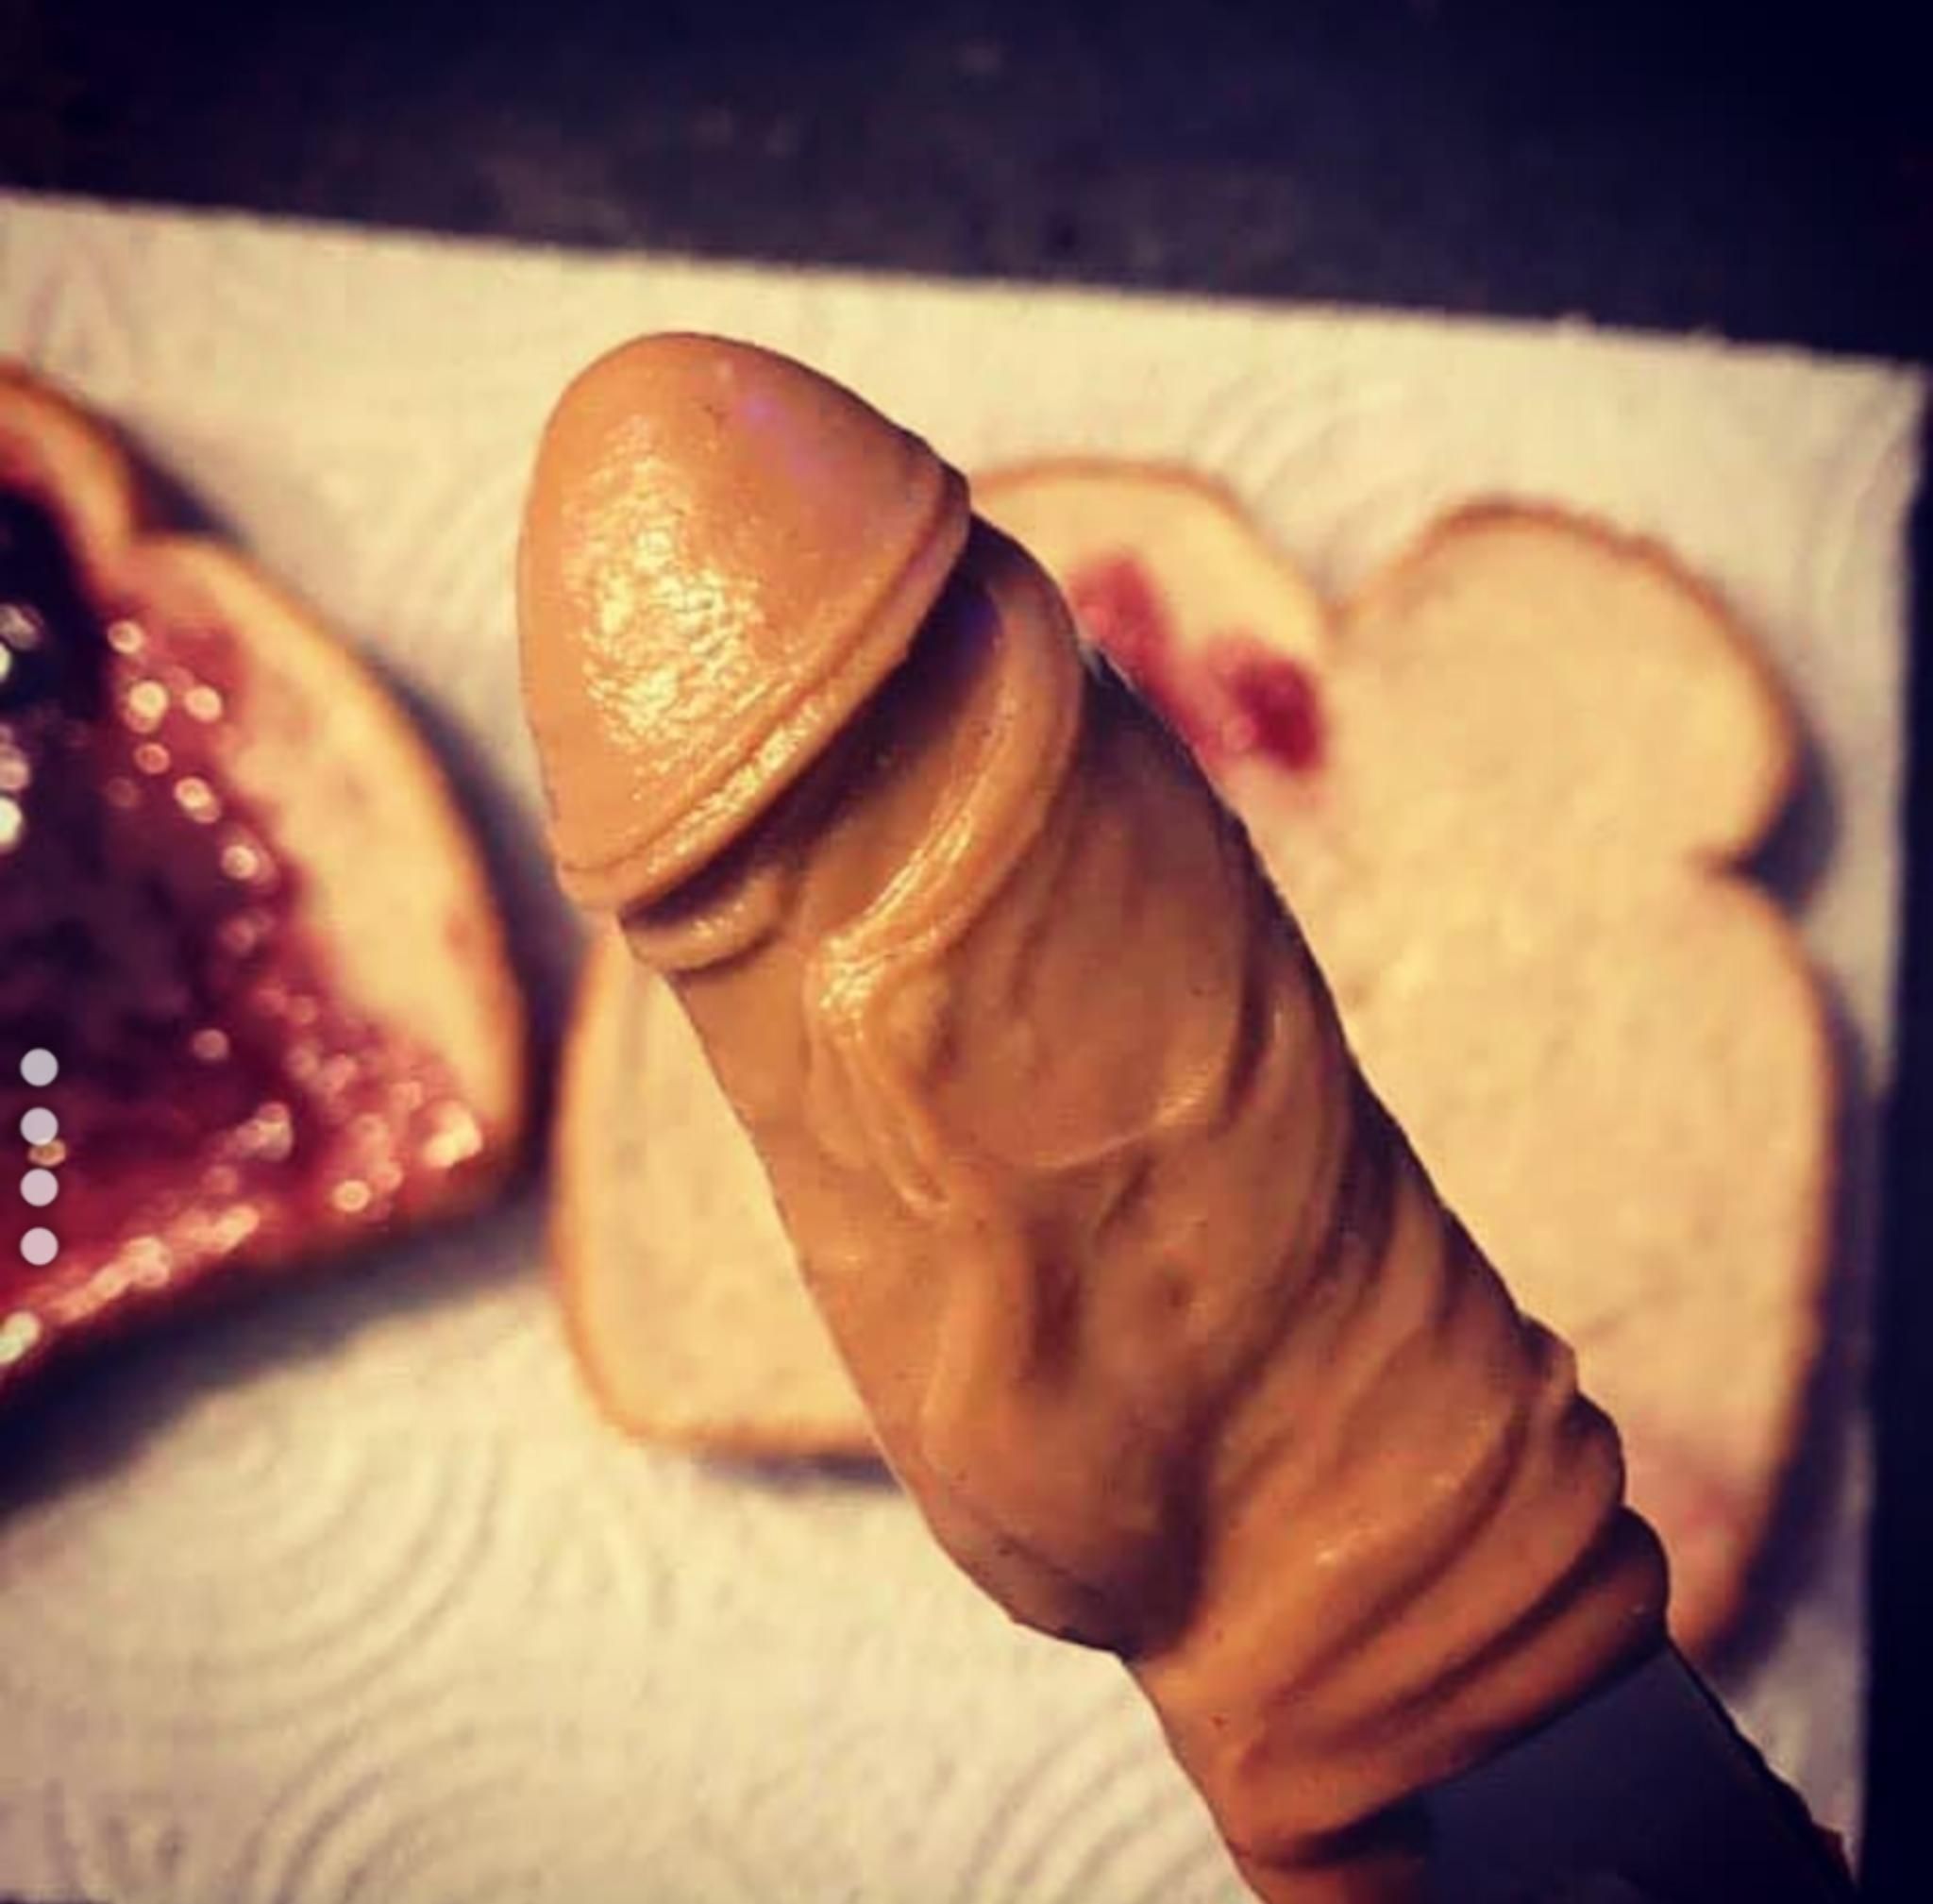 Unintentional penis butter